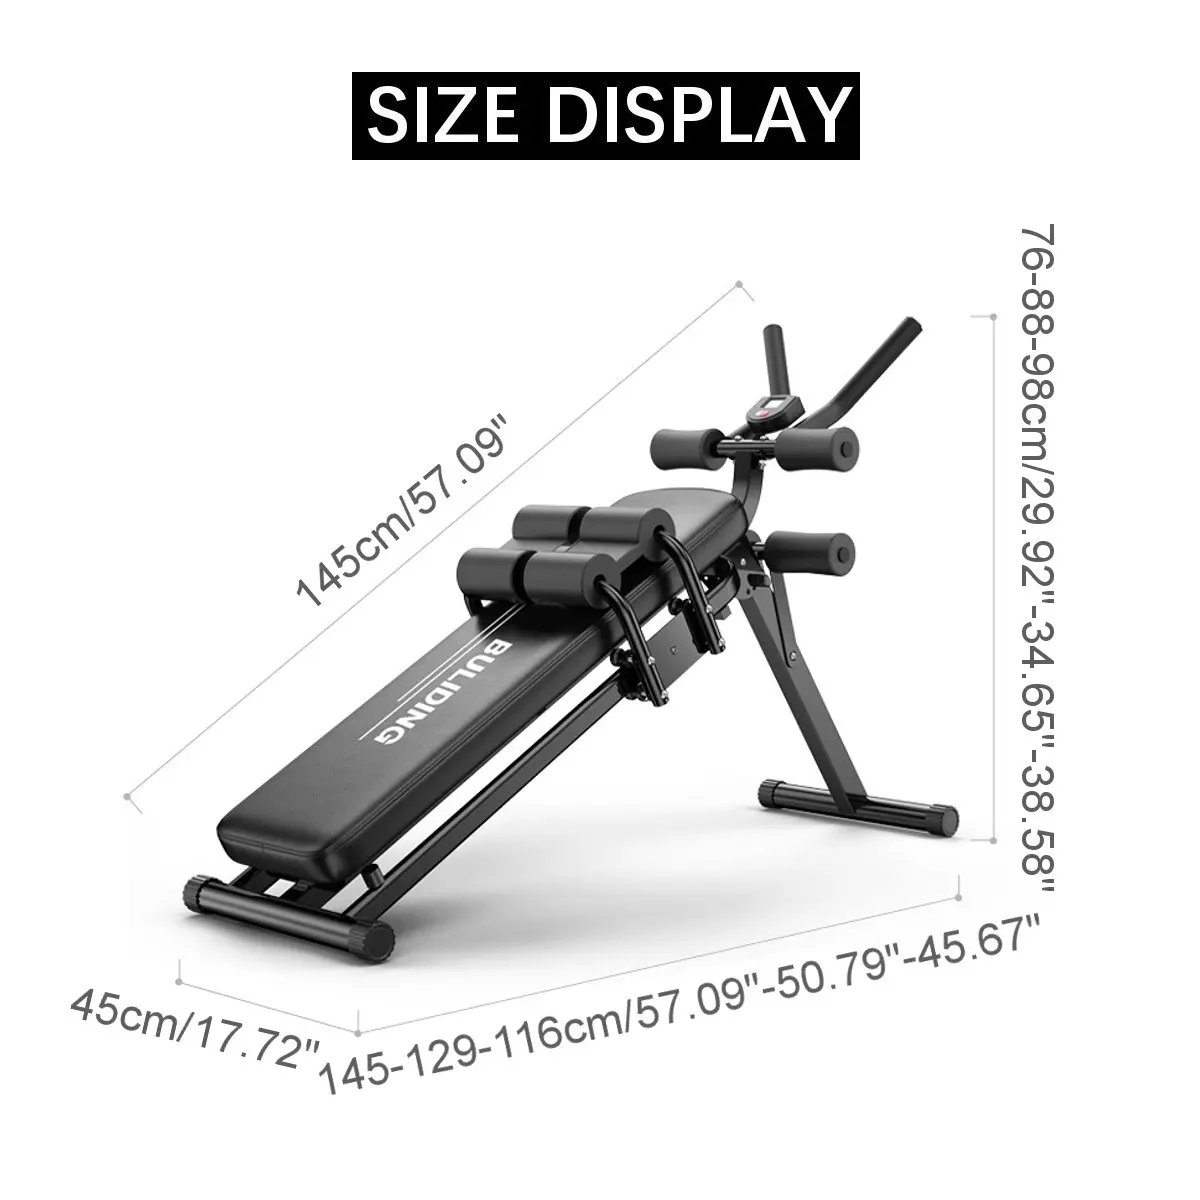 Fitness, Gym & Exercise equipment Canada. GRT Products Hab447450cb9b4946a621ccc8569c9e09n 3 Levels Adjustable Sit Up Benches Abdominal Muscle Trainer Multifunction Abs Workout Lose Weight Home Gym Fitness Equipment  